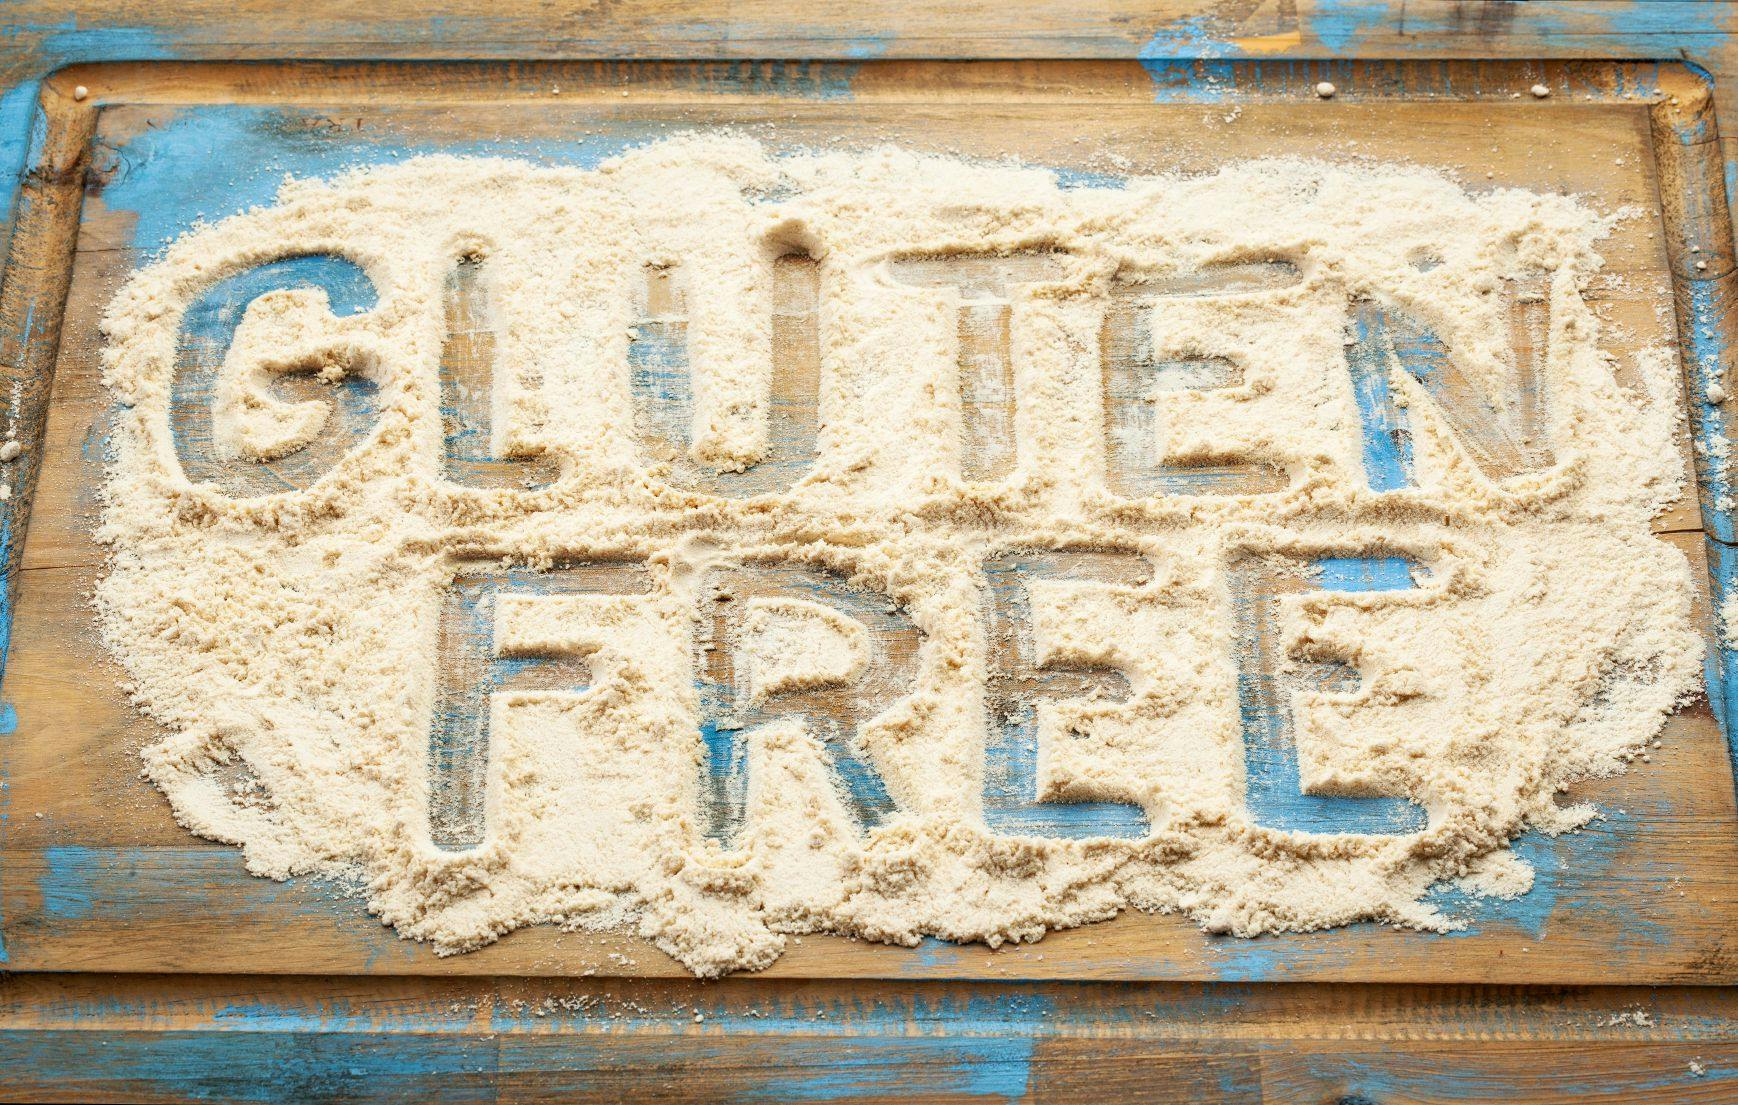 The Top Four Challenges of Developing Successful Gluten-Free Products